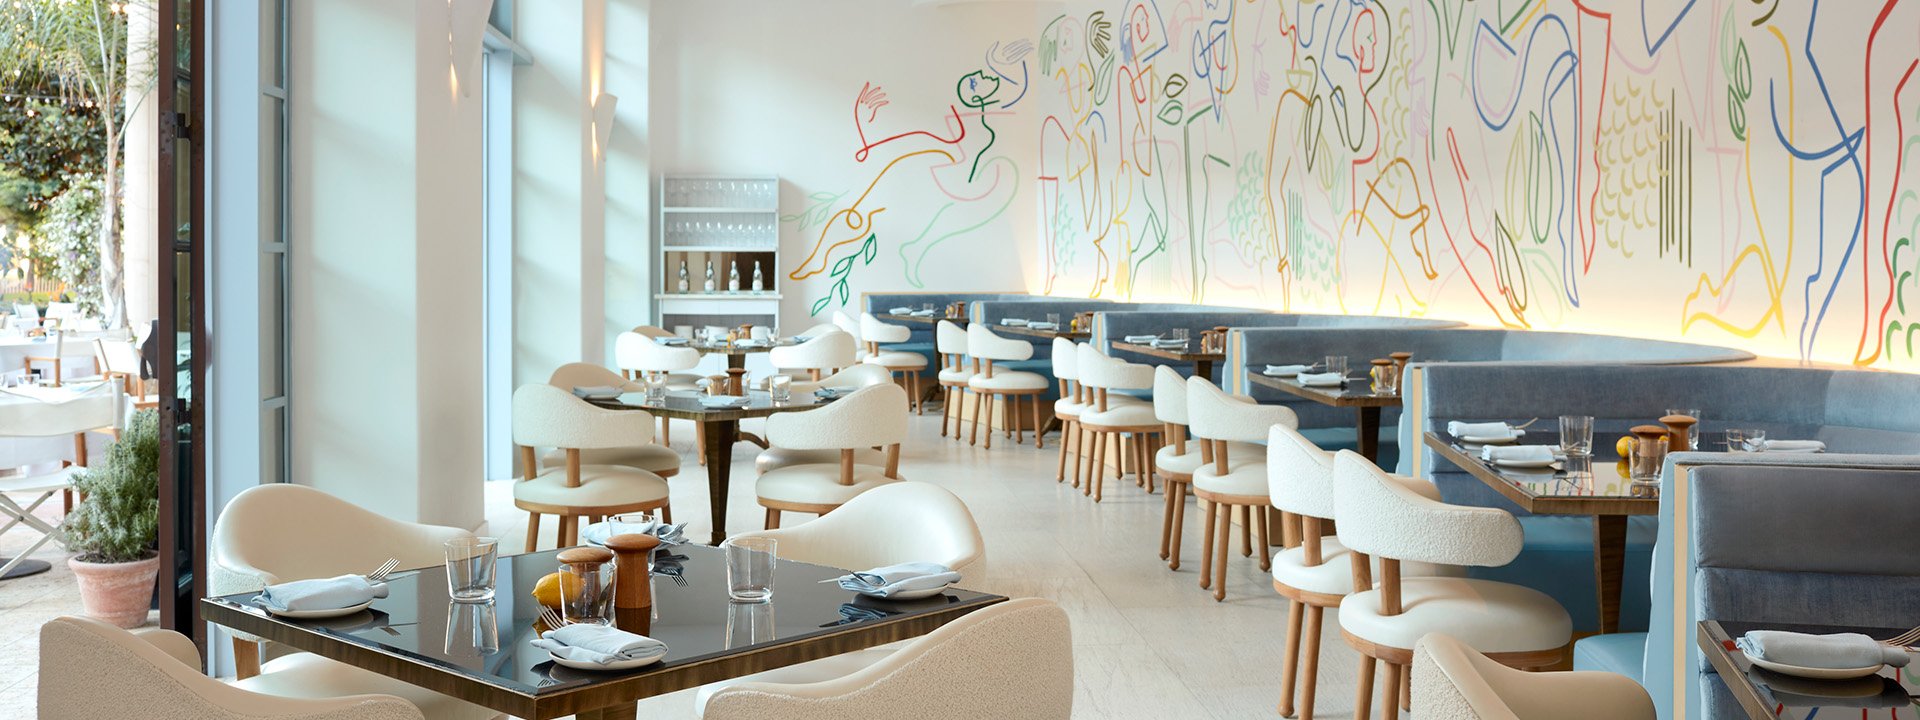 The inside dining area of The Terrace restaurant. There are light blue booths, dining tables, and a colorful mural on the wall.